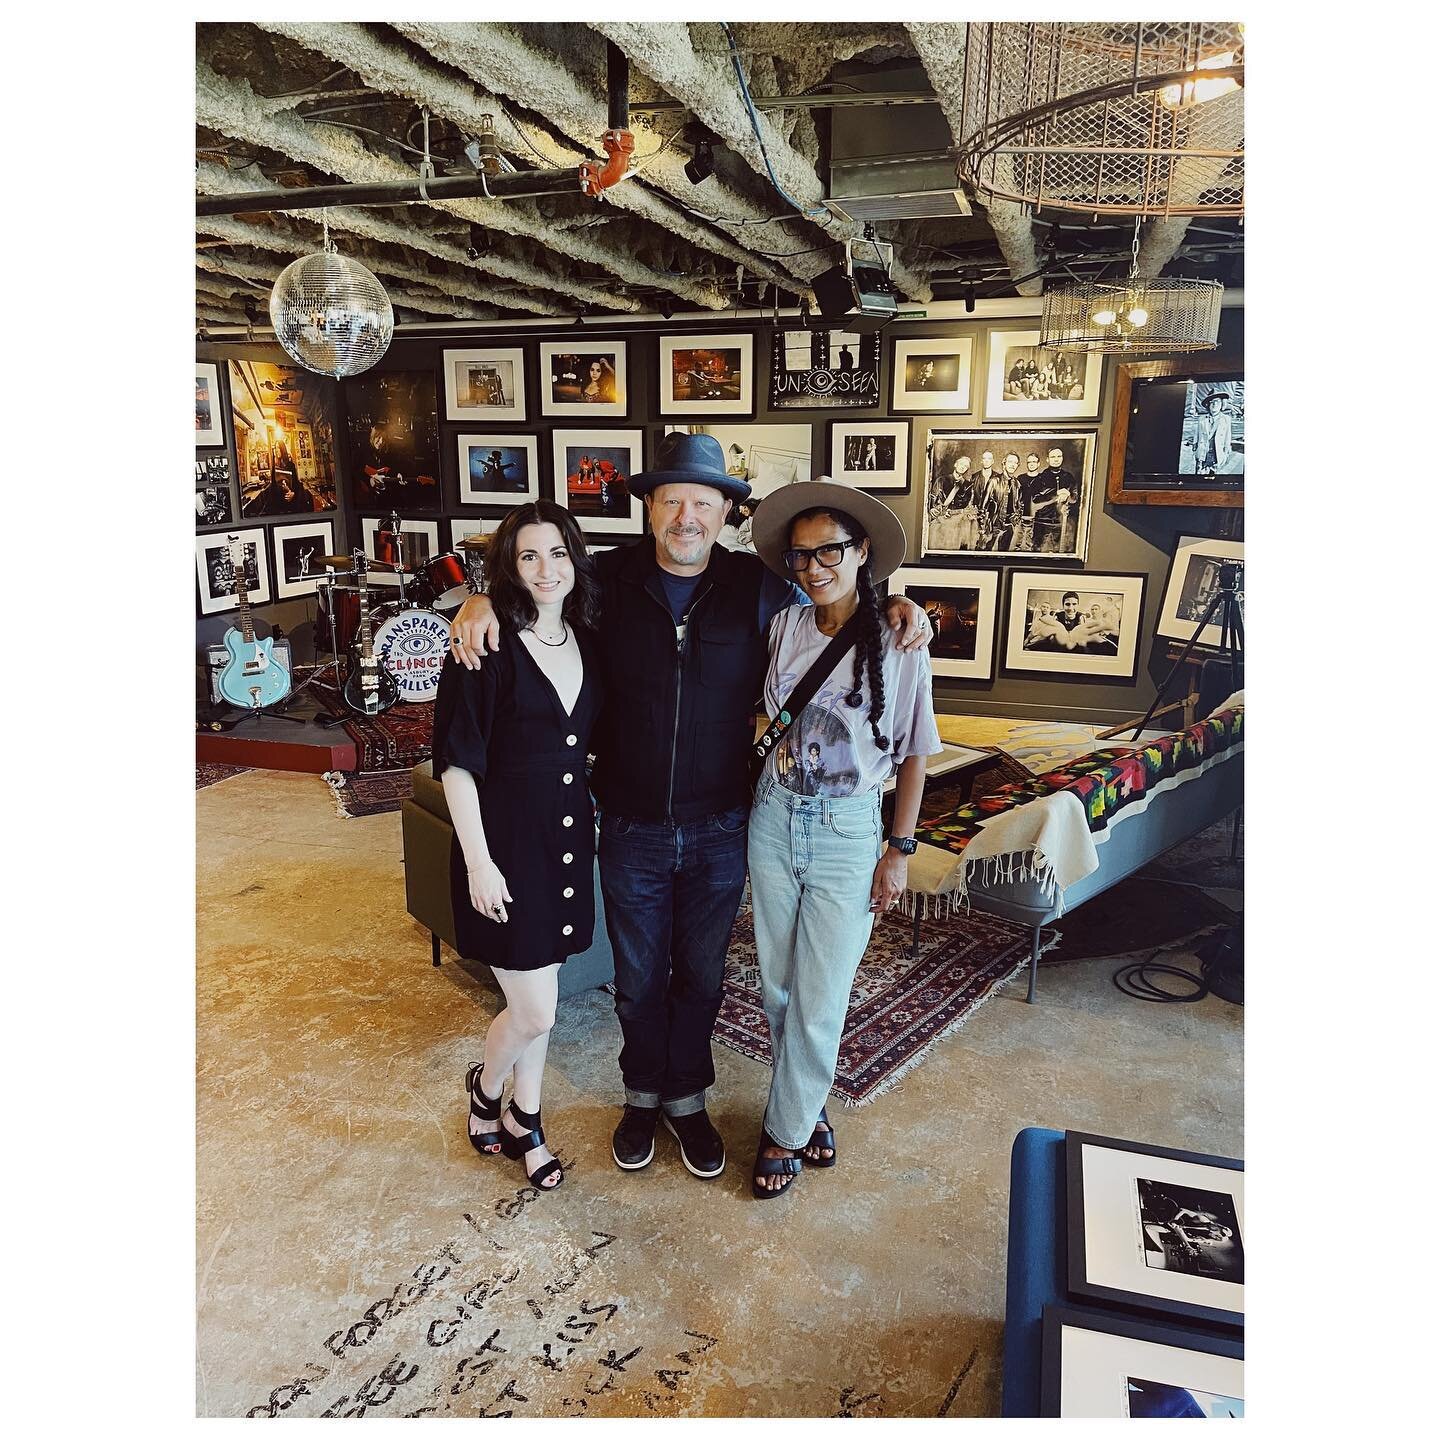 Our last On The Road with this legend. Thank you for the awesome stories and the birthday wishes. @dannybones64 @transparentclinchgallery @llreps 📸 @adrianopedraza